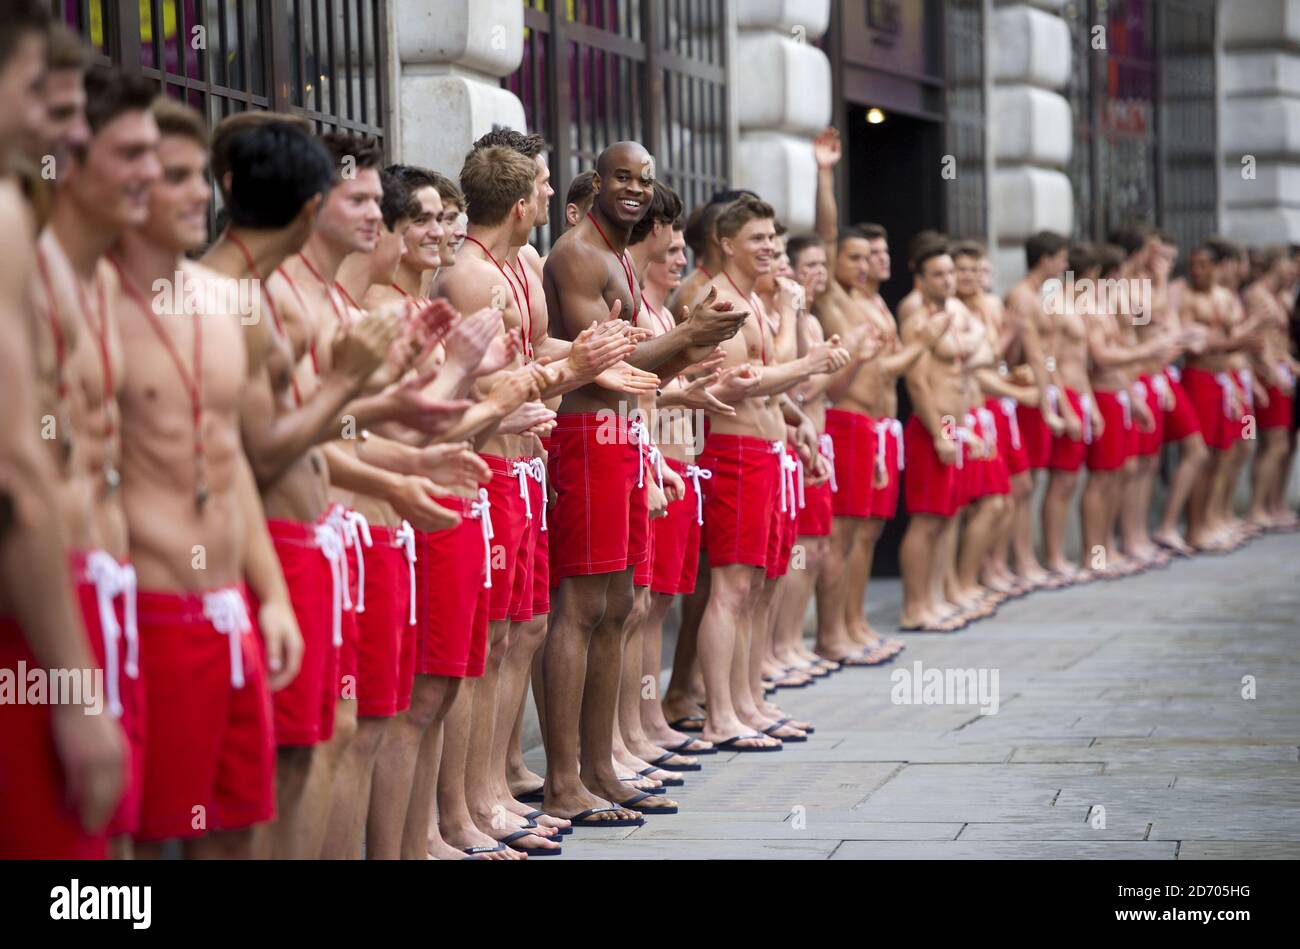 Models dressed as lifeguards pictured as they open the new Gilly Hicks and  Hollister flagship stores on Regent Street, London Stock Photo - Alamy